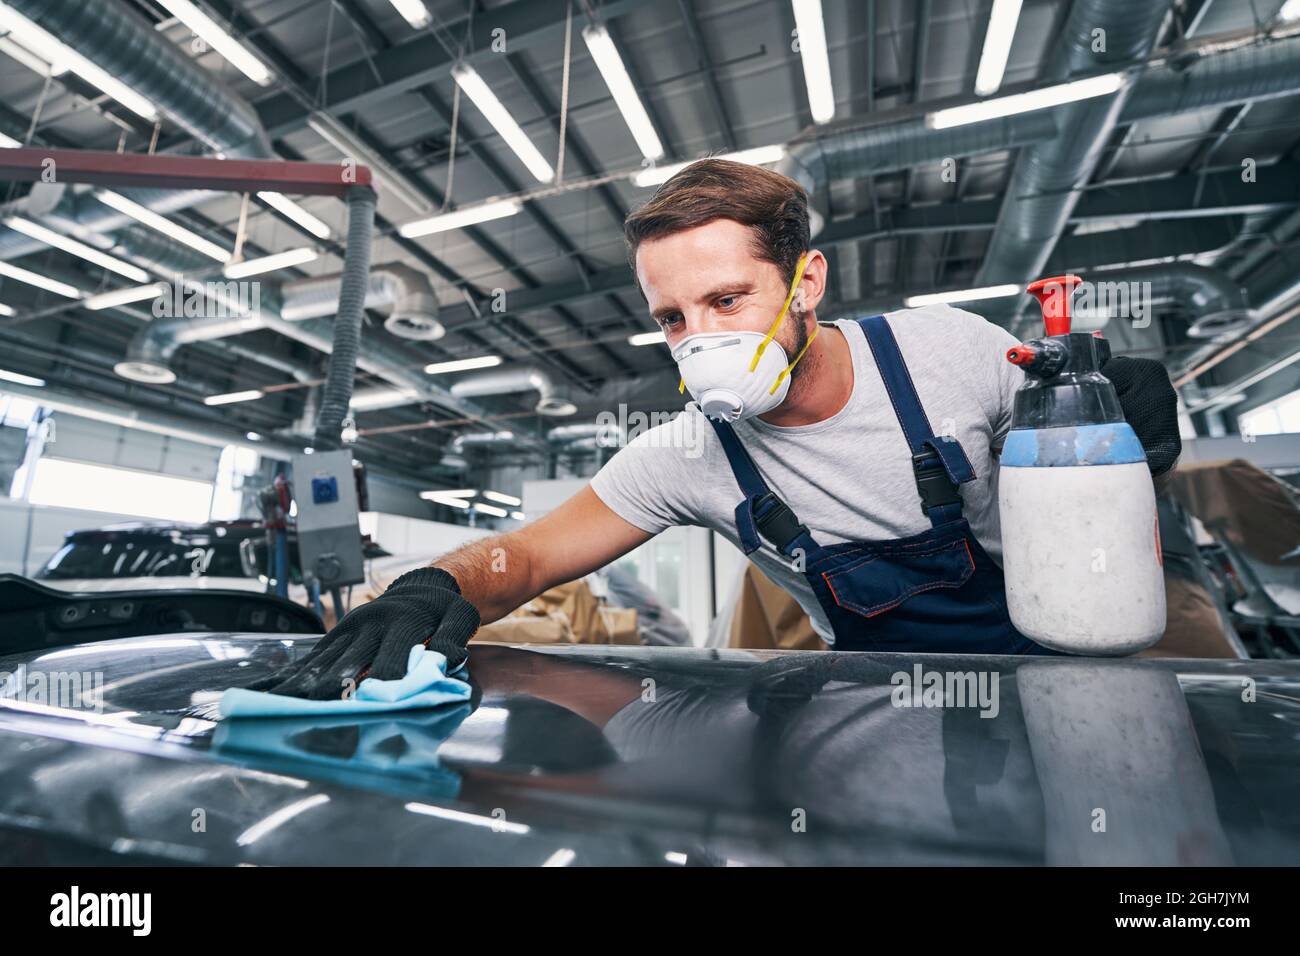 Automobile mechanic wiping dust off a car with cloth Stock Photo